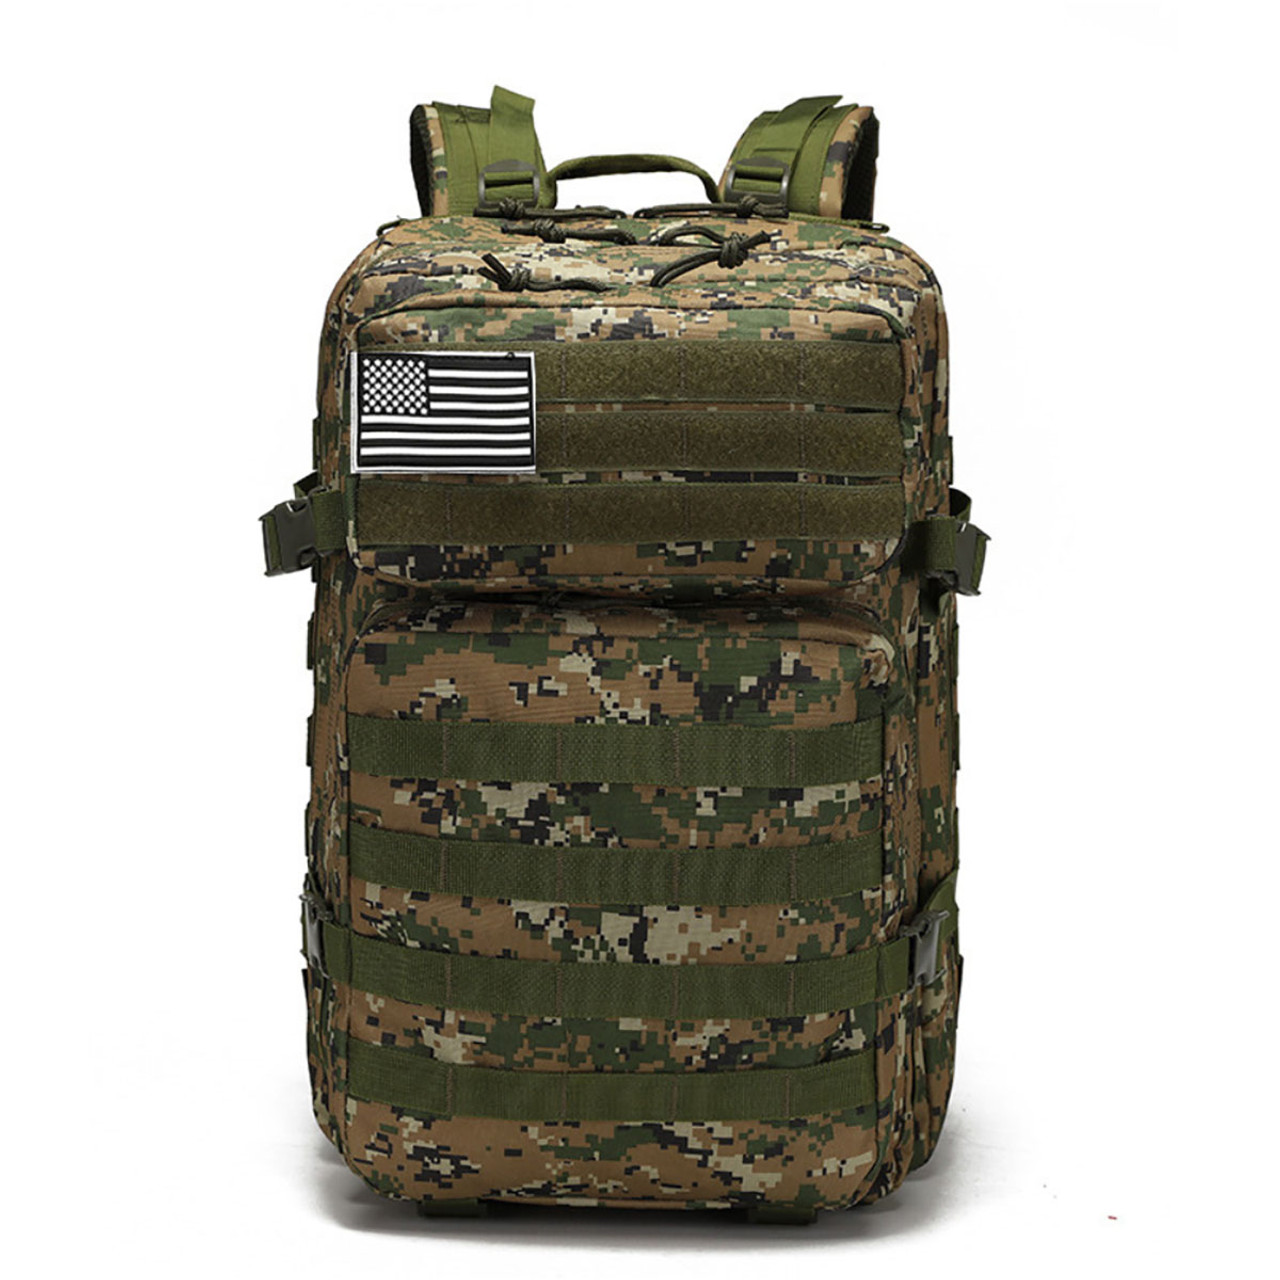 Tactical Military 45L Molle Rucksack Backpack product image